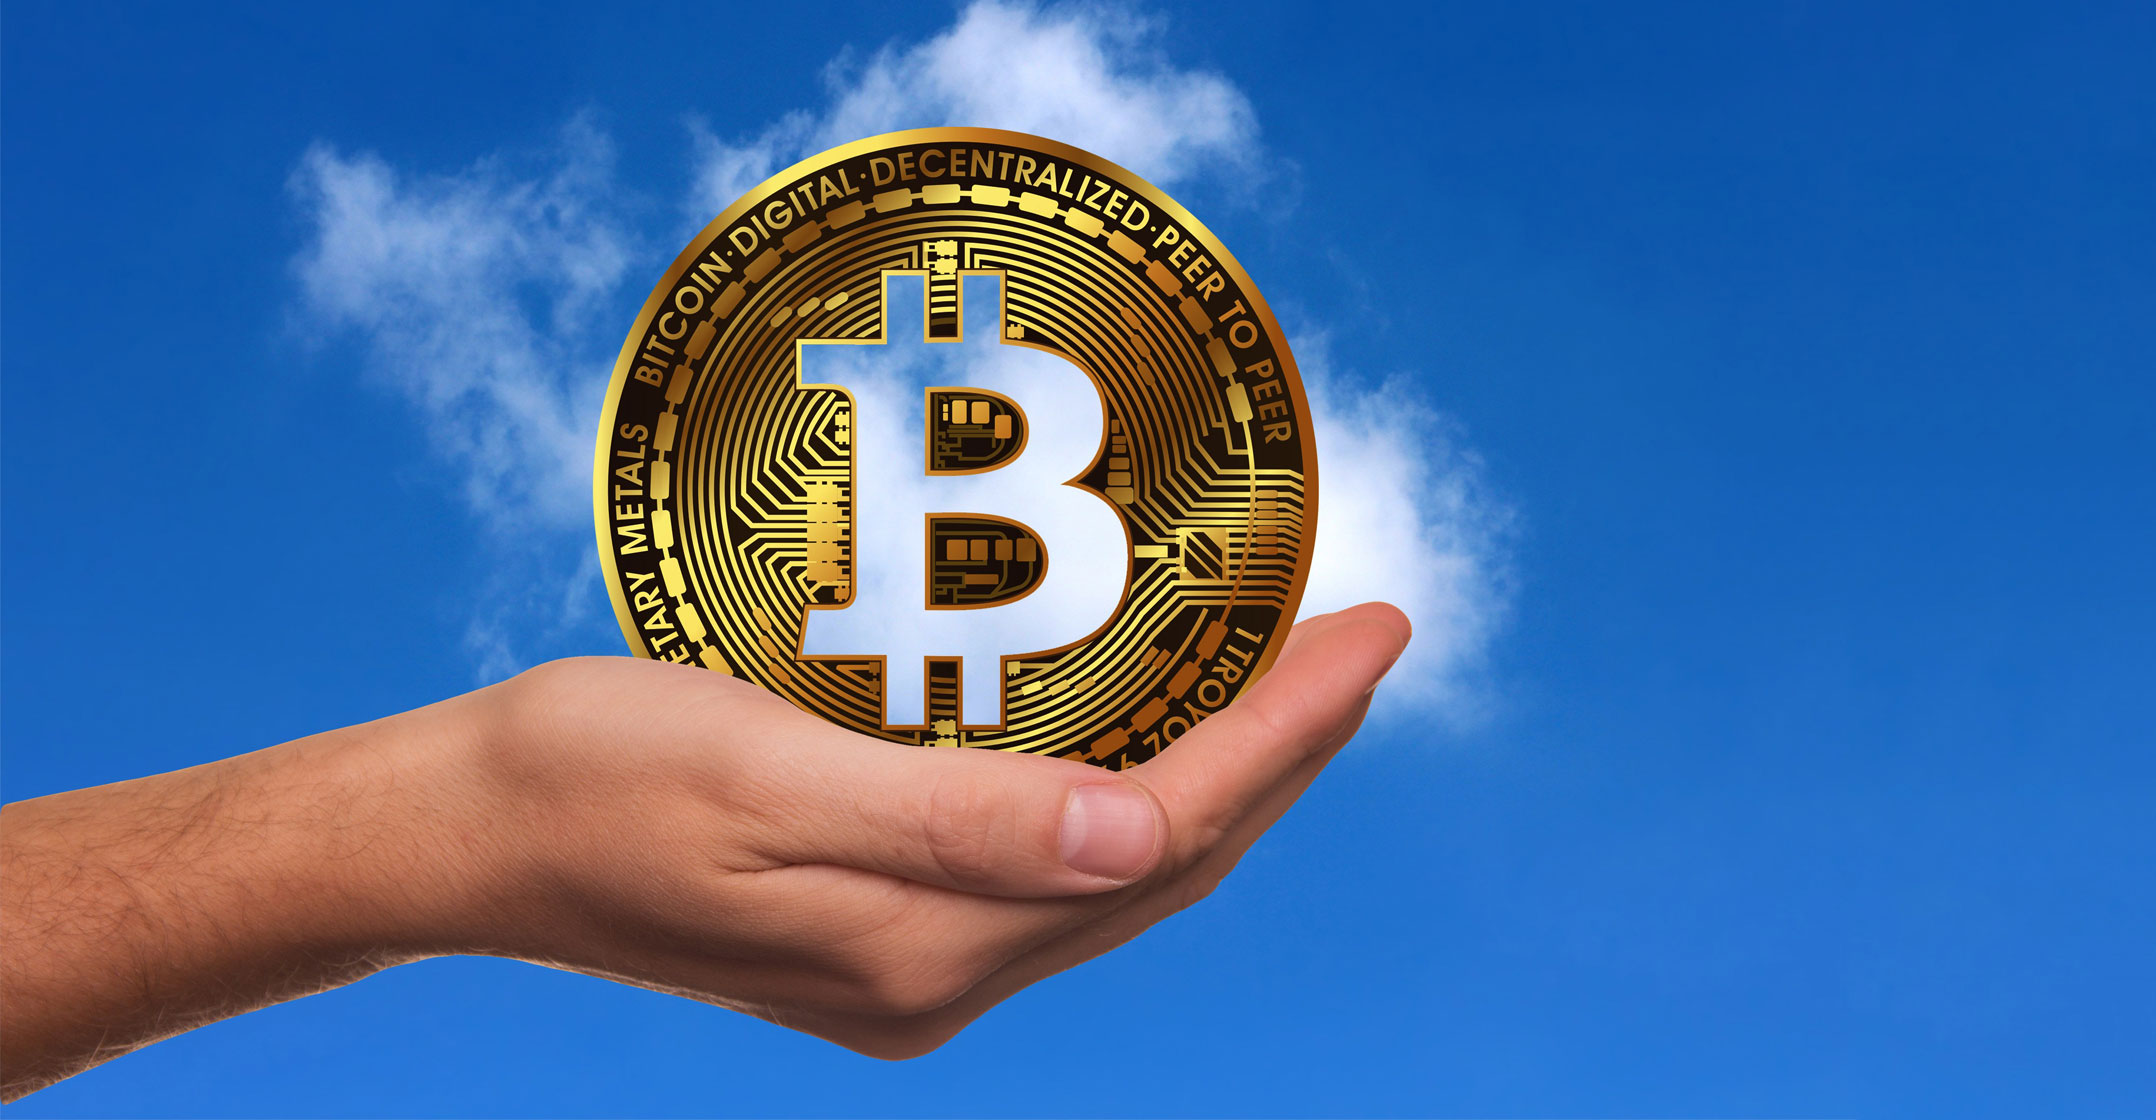 Growing calls for bitcoin, other cryptos to be regulated ...